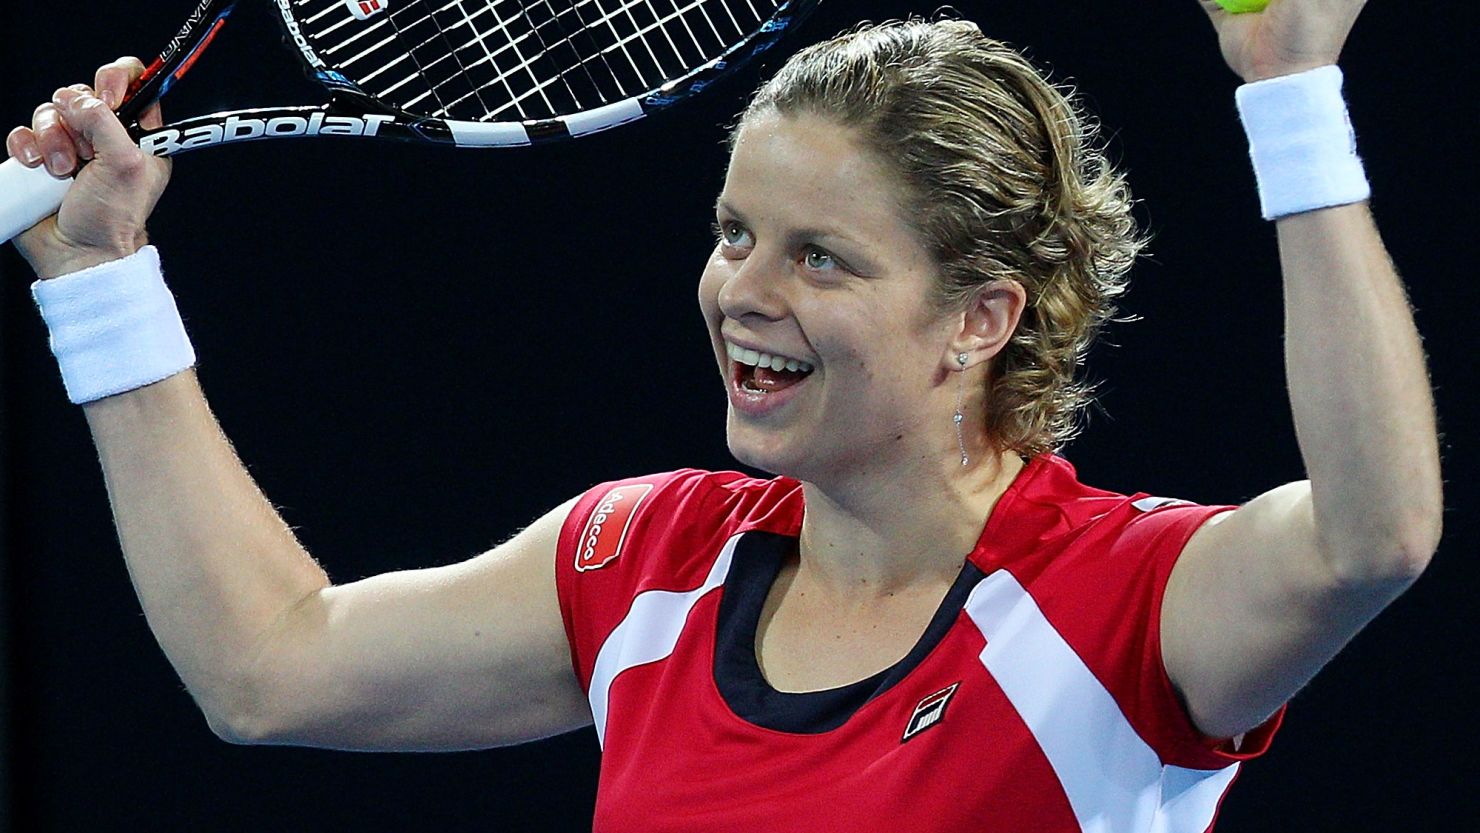 Belgium's Kim Clijsters will be looking looking to defend her Australian Open crown in Melbourne later this month.